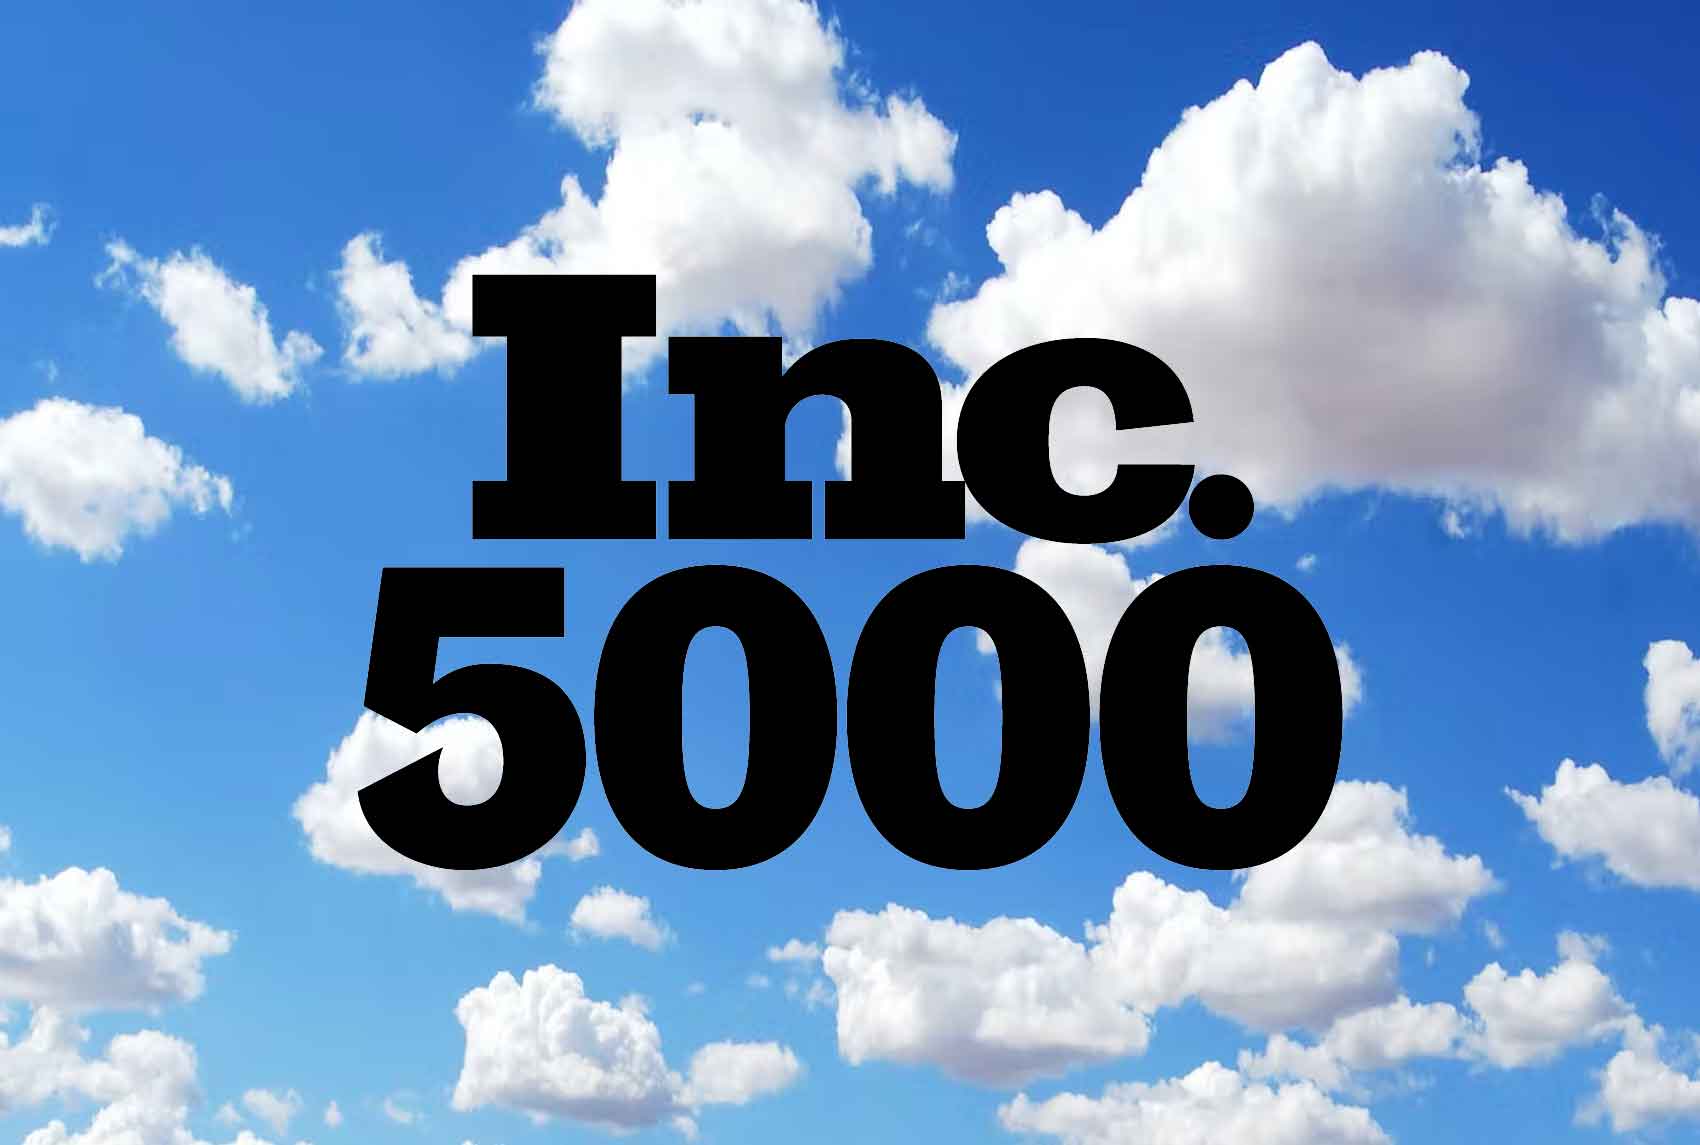 Express Wash Concepts Once Again Named to Inc. 5000 List of America’s Fastest-Growing Private Companies